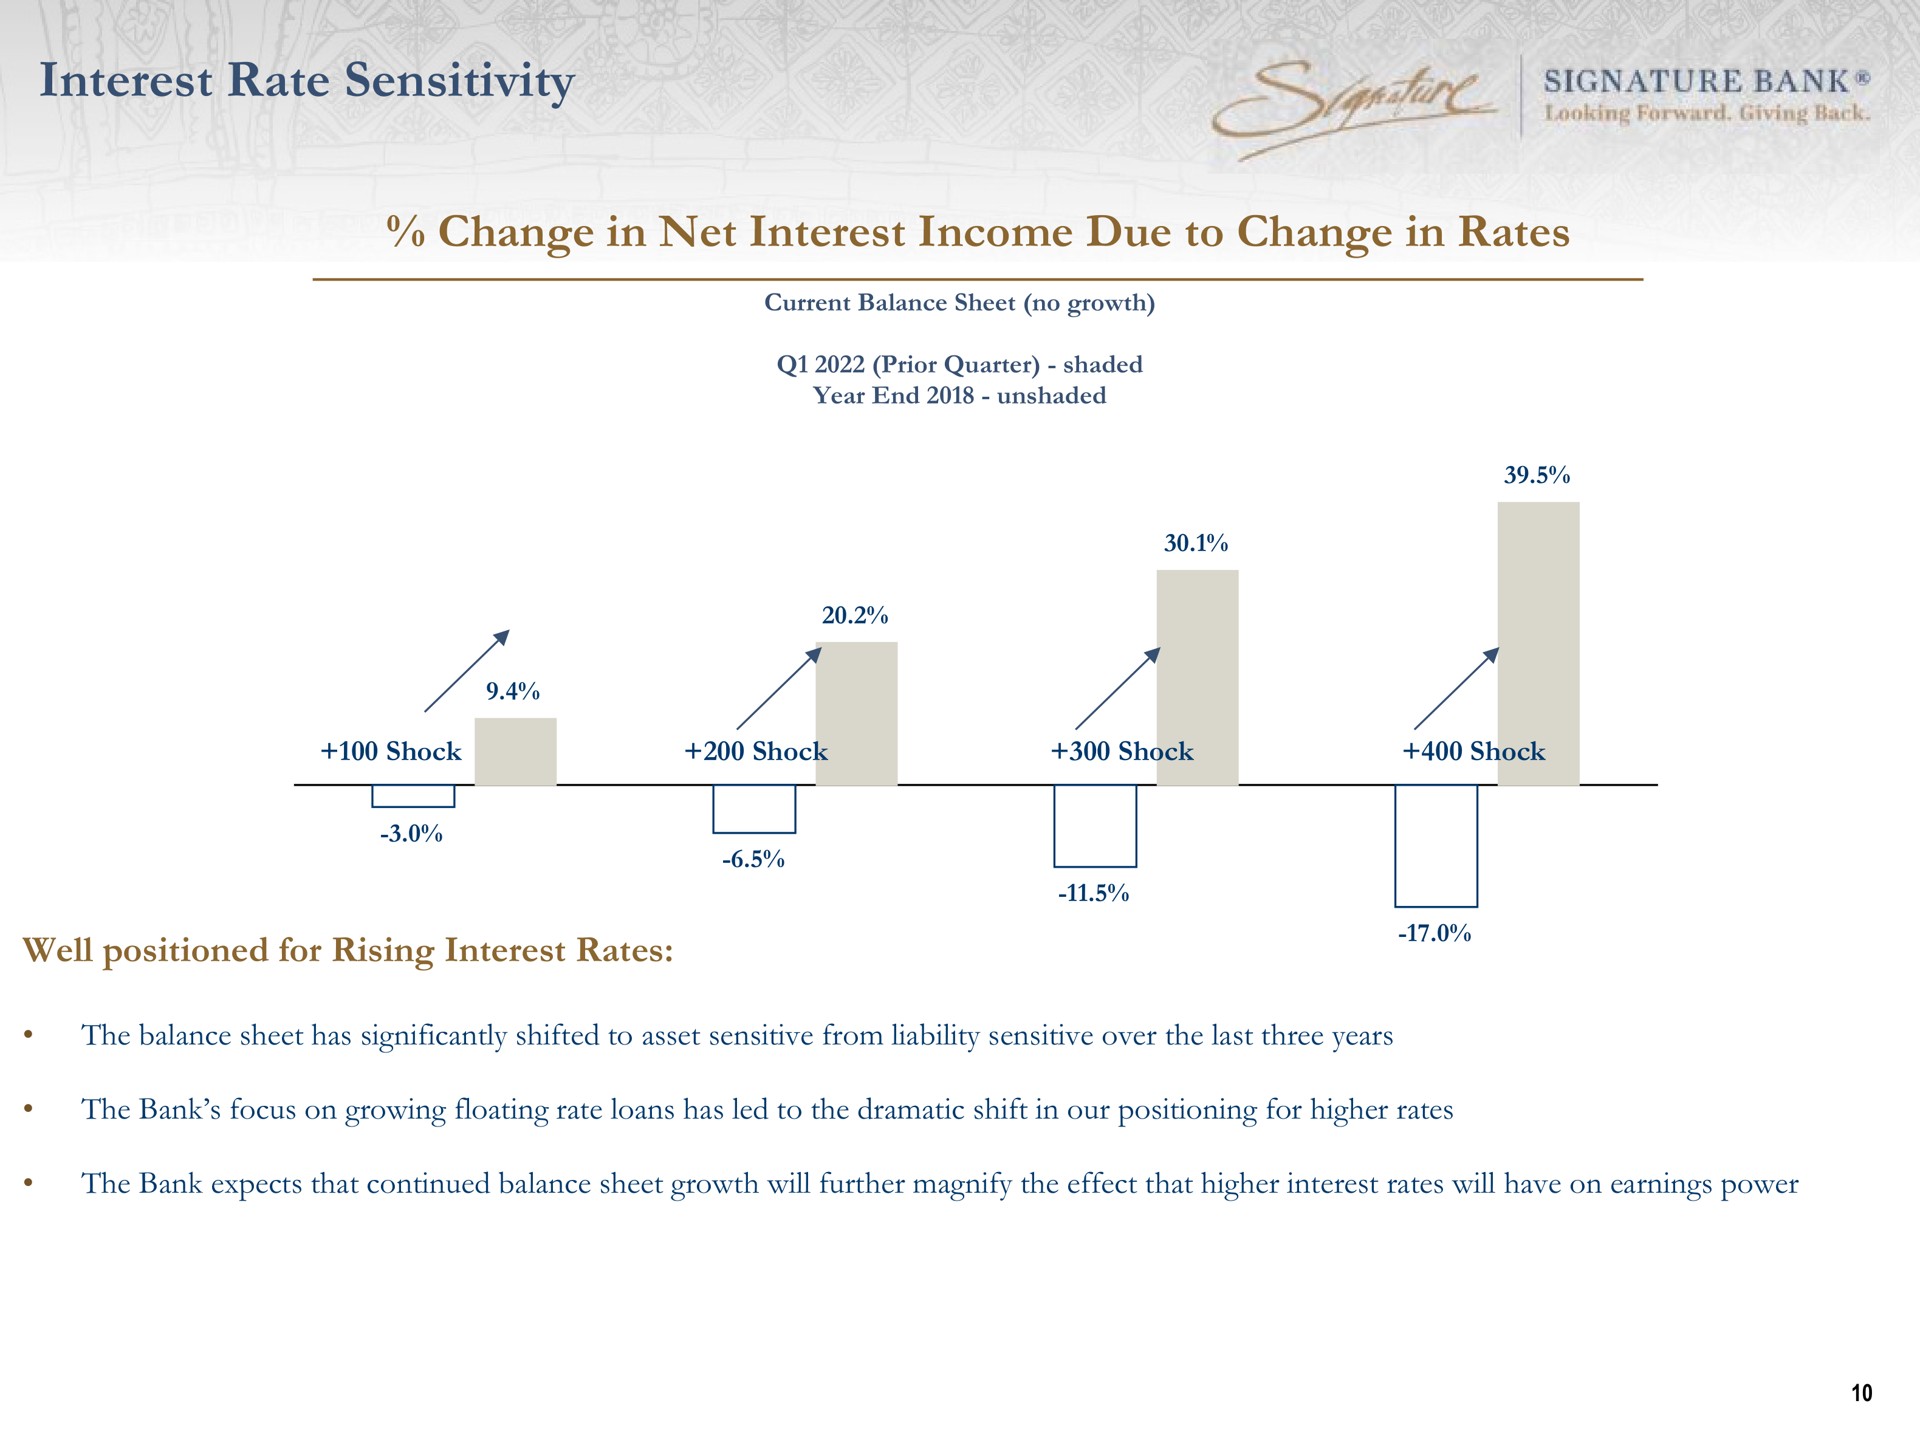 interest rate sensitivity change in net interest income due to change in rates signature bank a well positioned for rising | Signature Bank